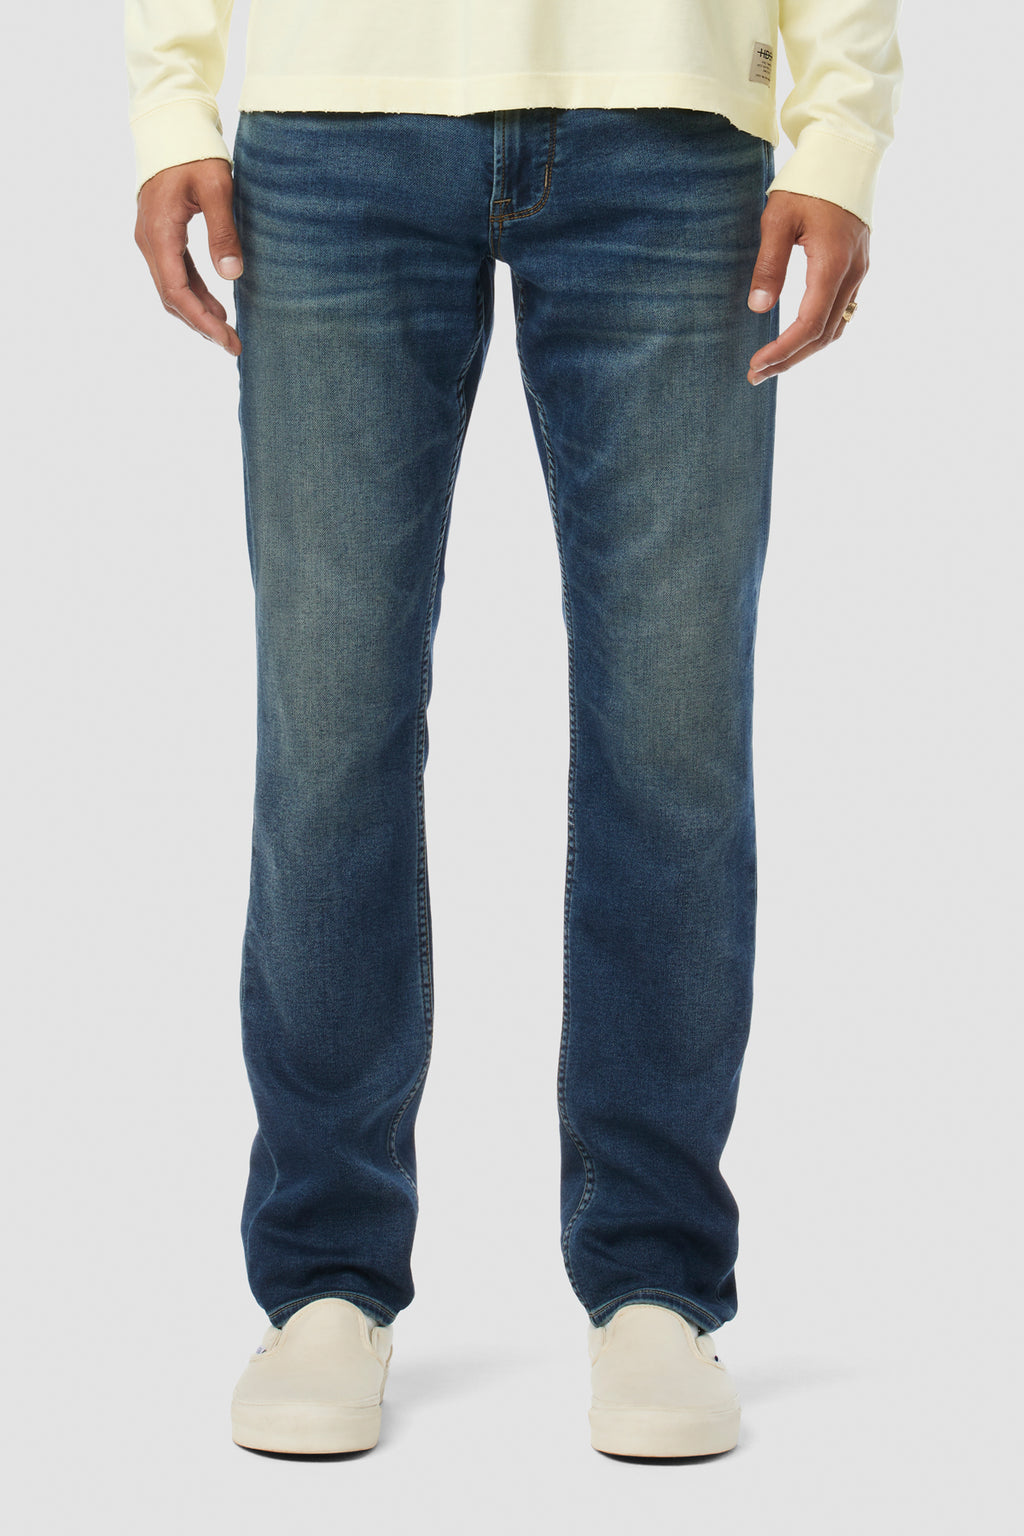 Slim Fit Washed Hudson jeans, Blue at best price in Ranchi